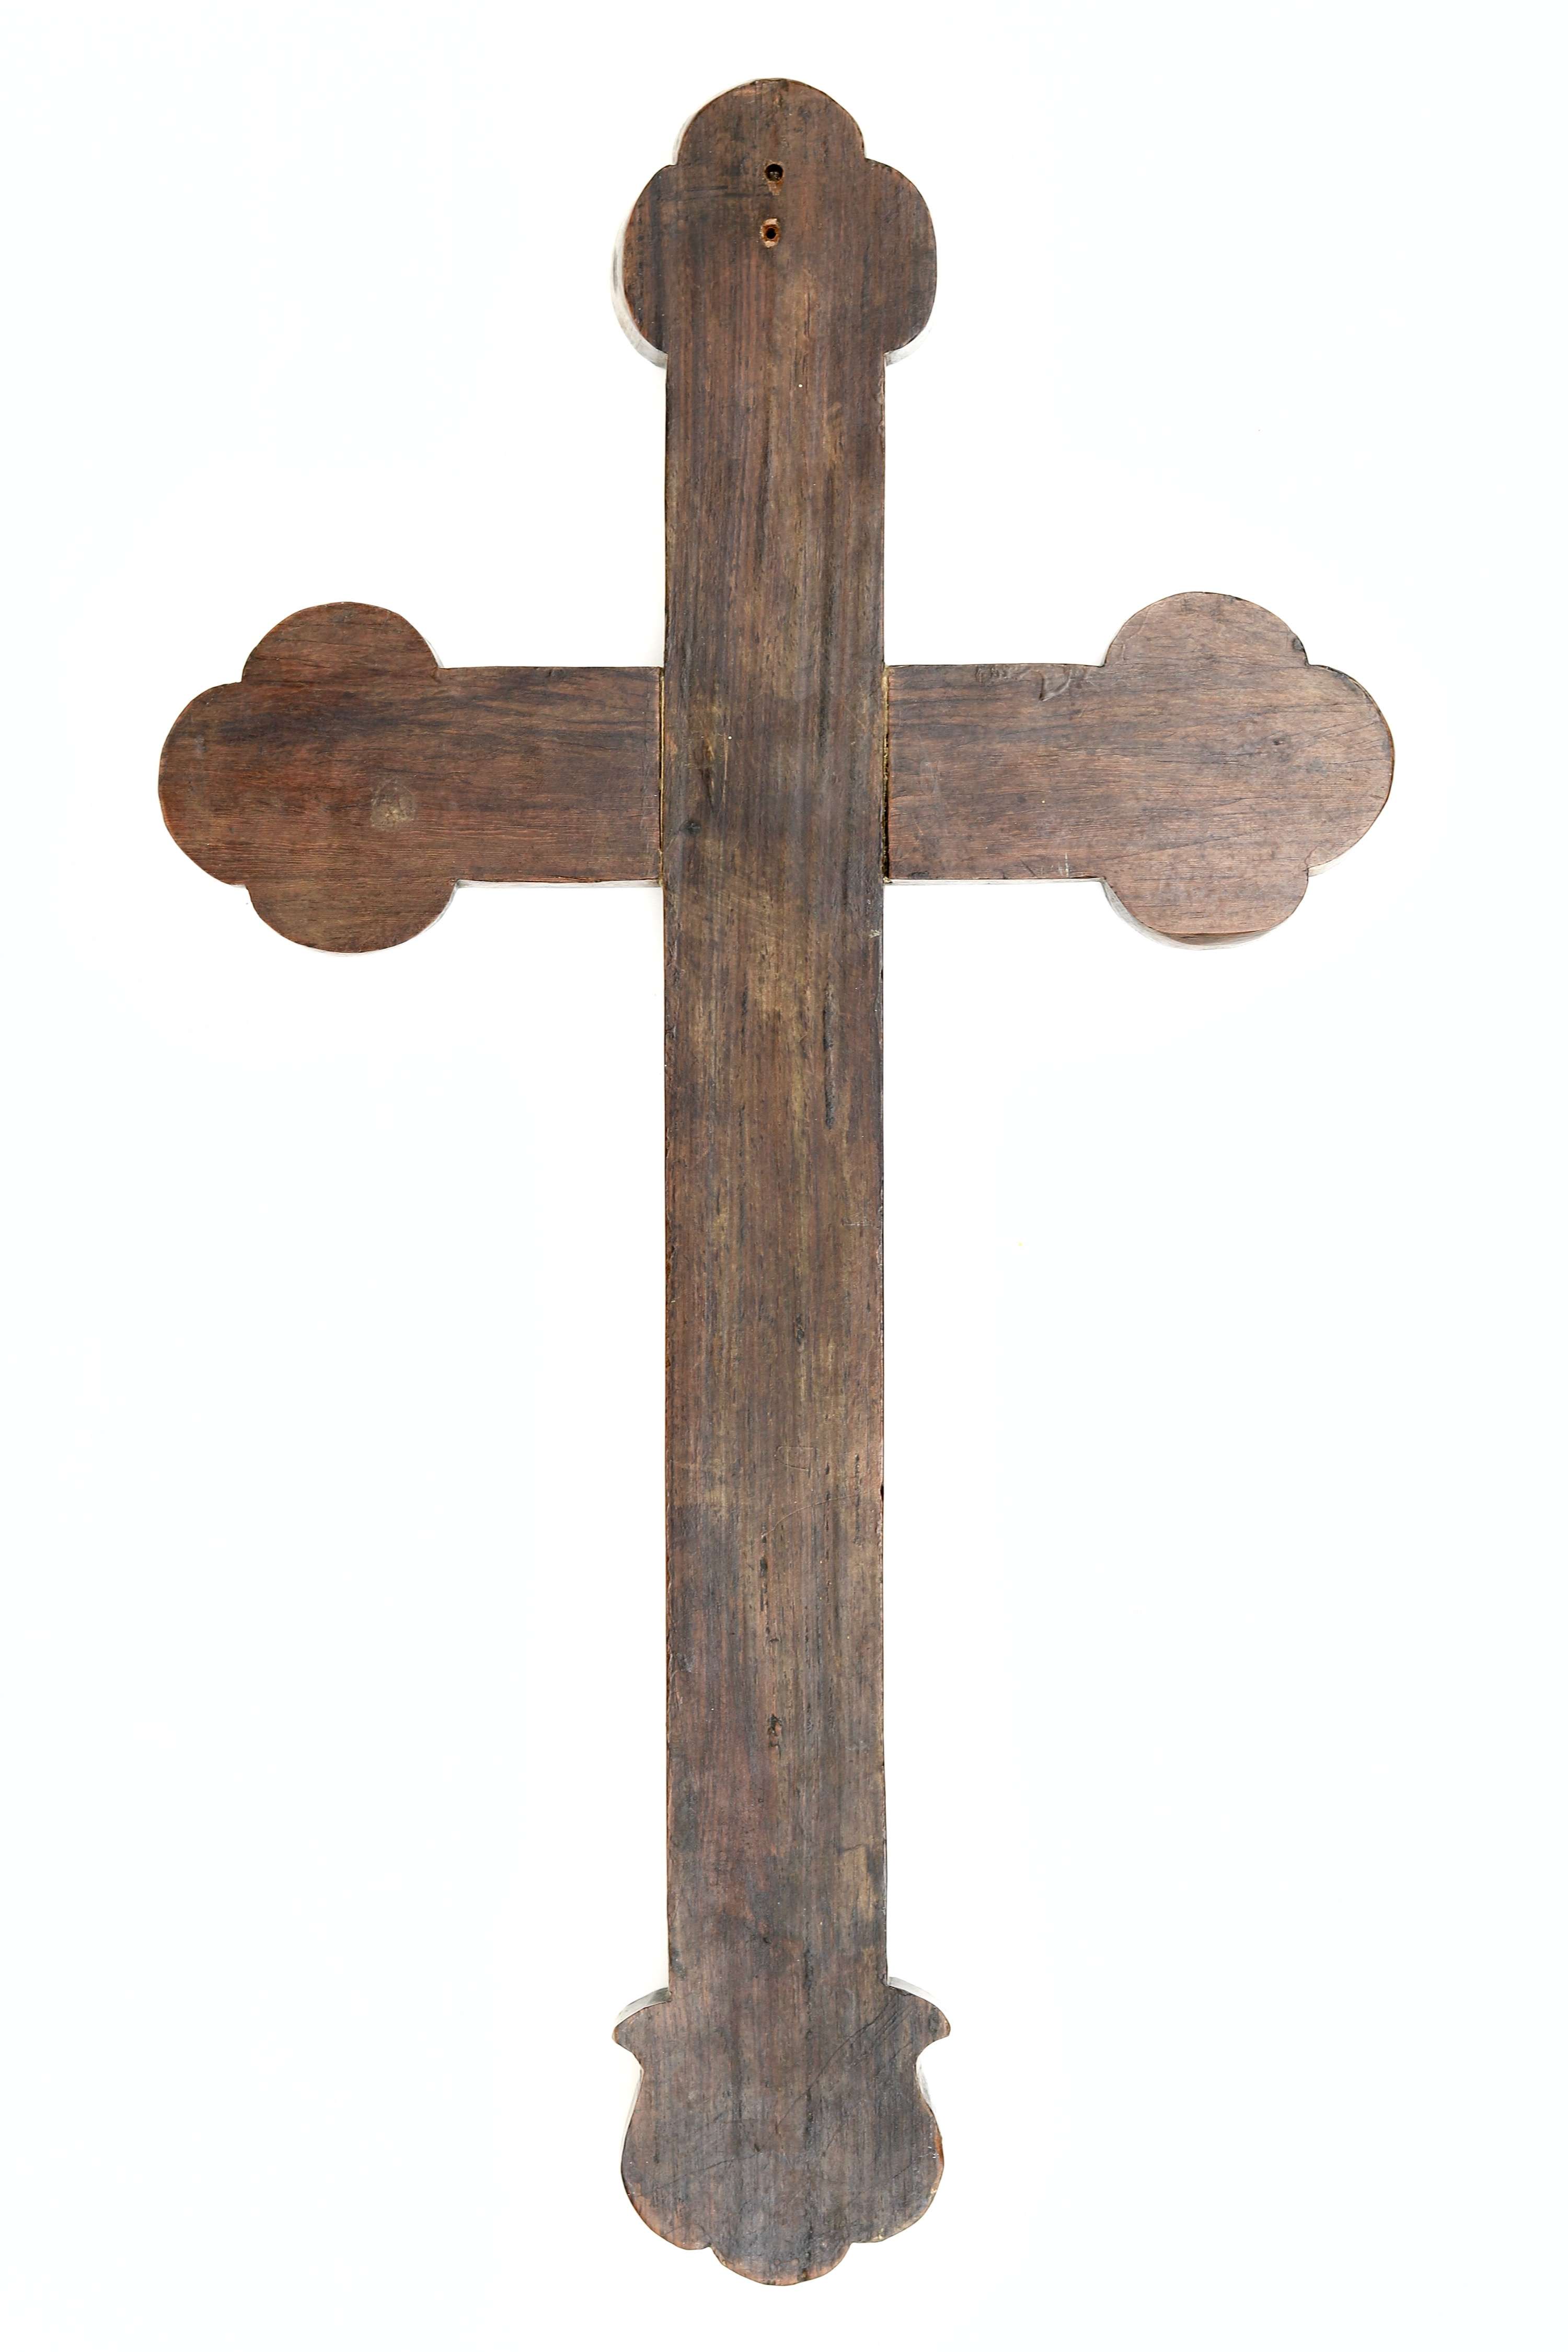 Christian wooden mother-of-pearl inlaid cross Nguyen dynasty Vietnam